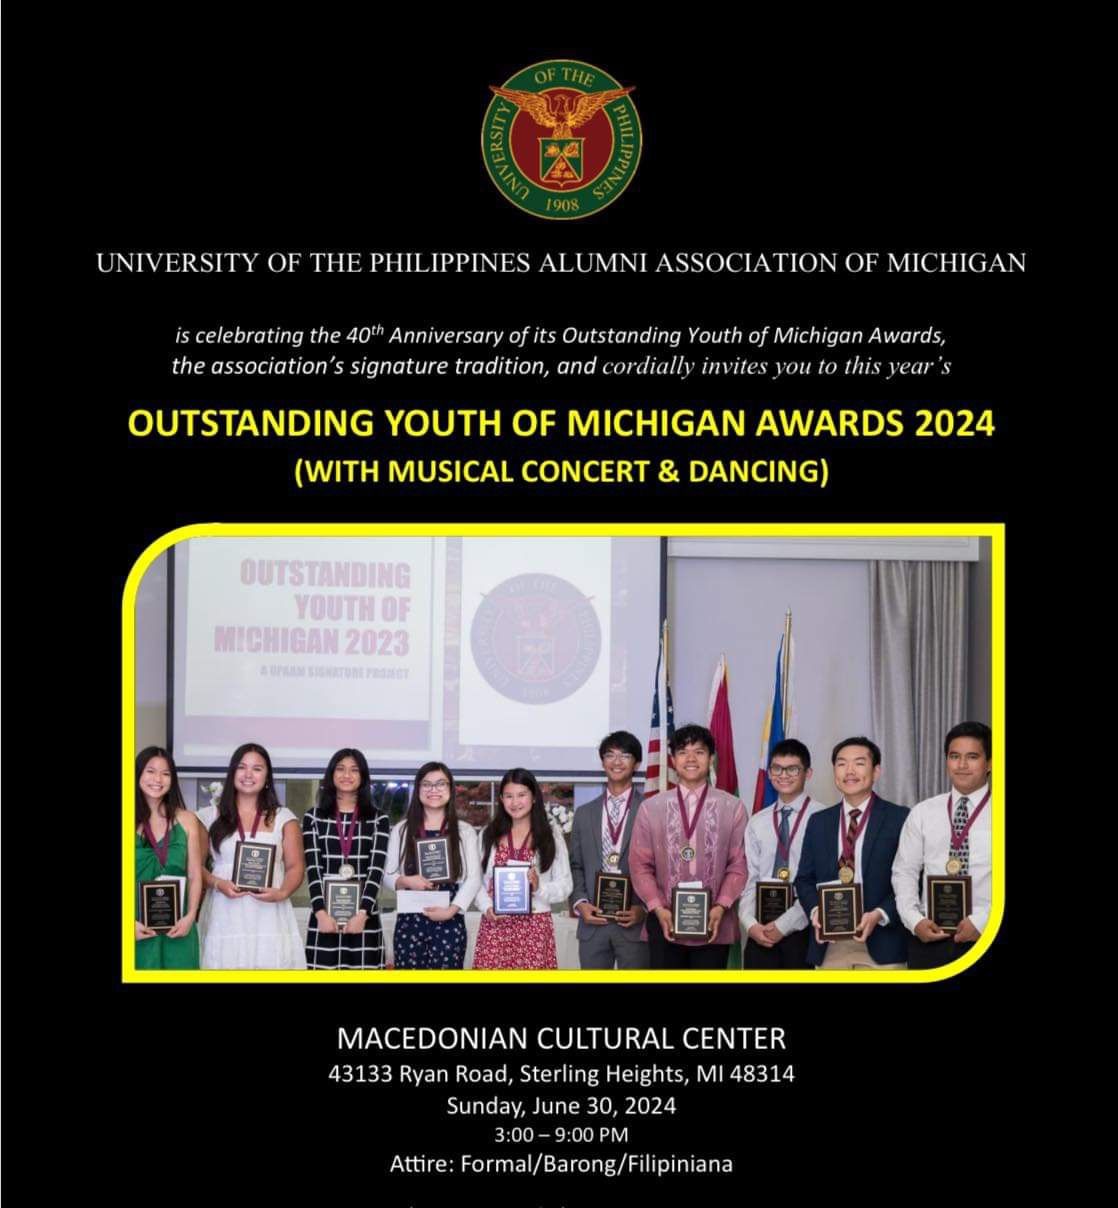 UPAAM\u2019s 40th Anniversary Celebration of Recognizing Outstanding Youth of Michigan 